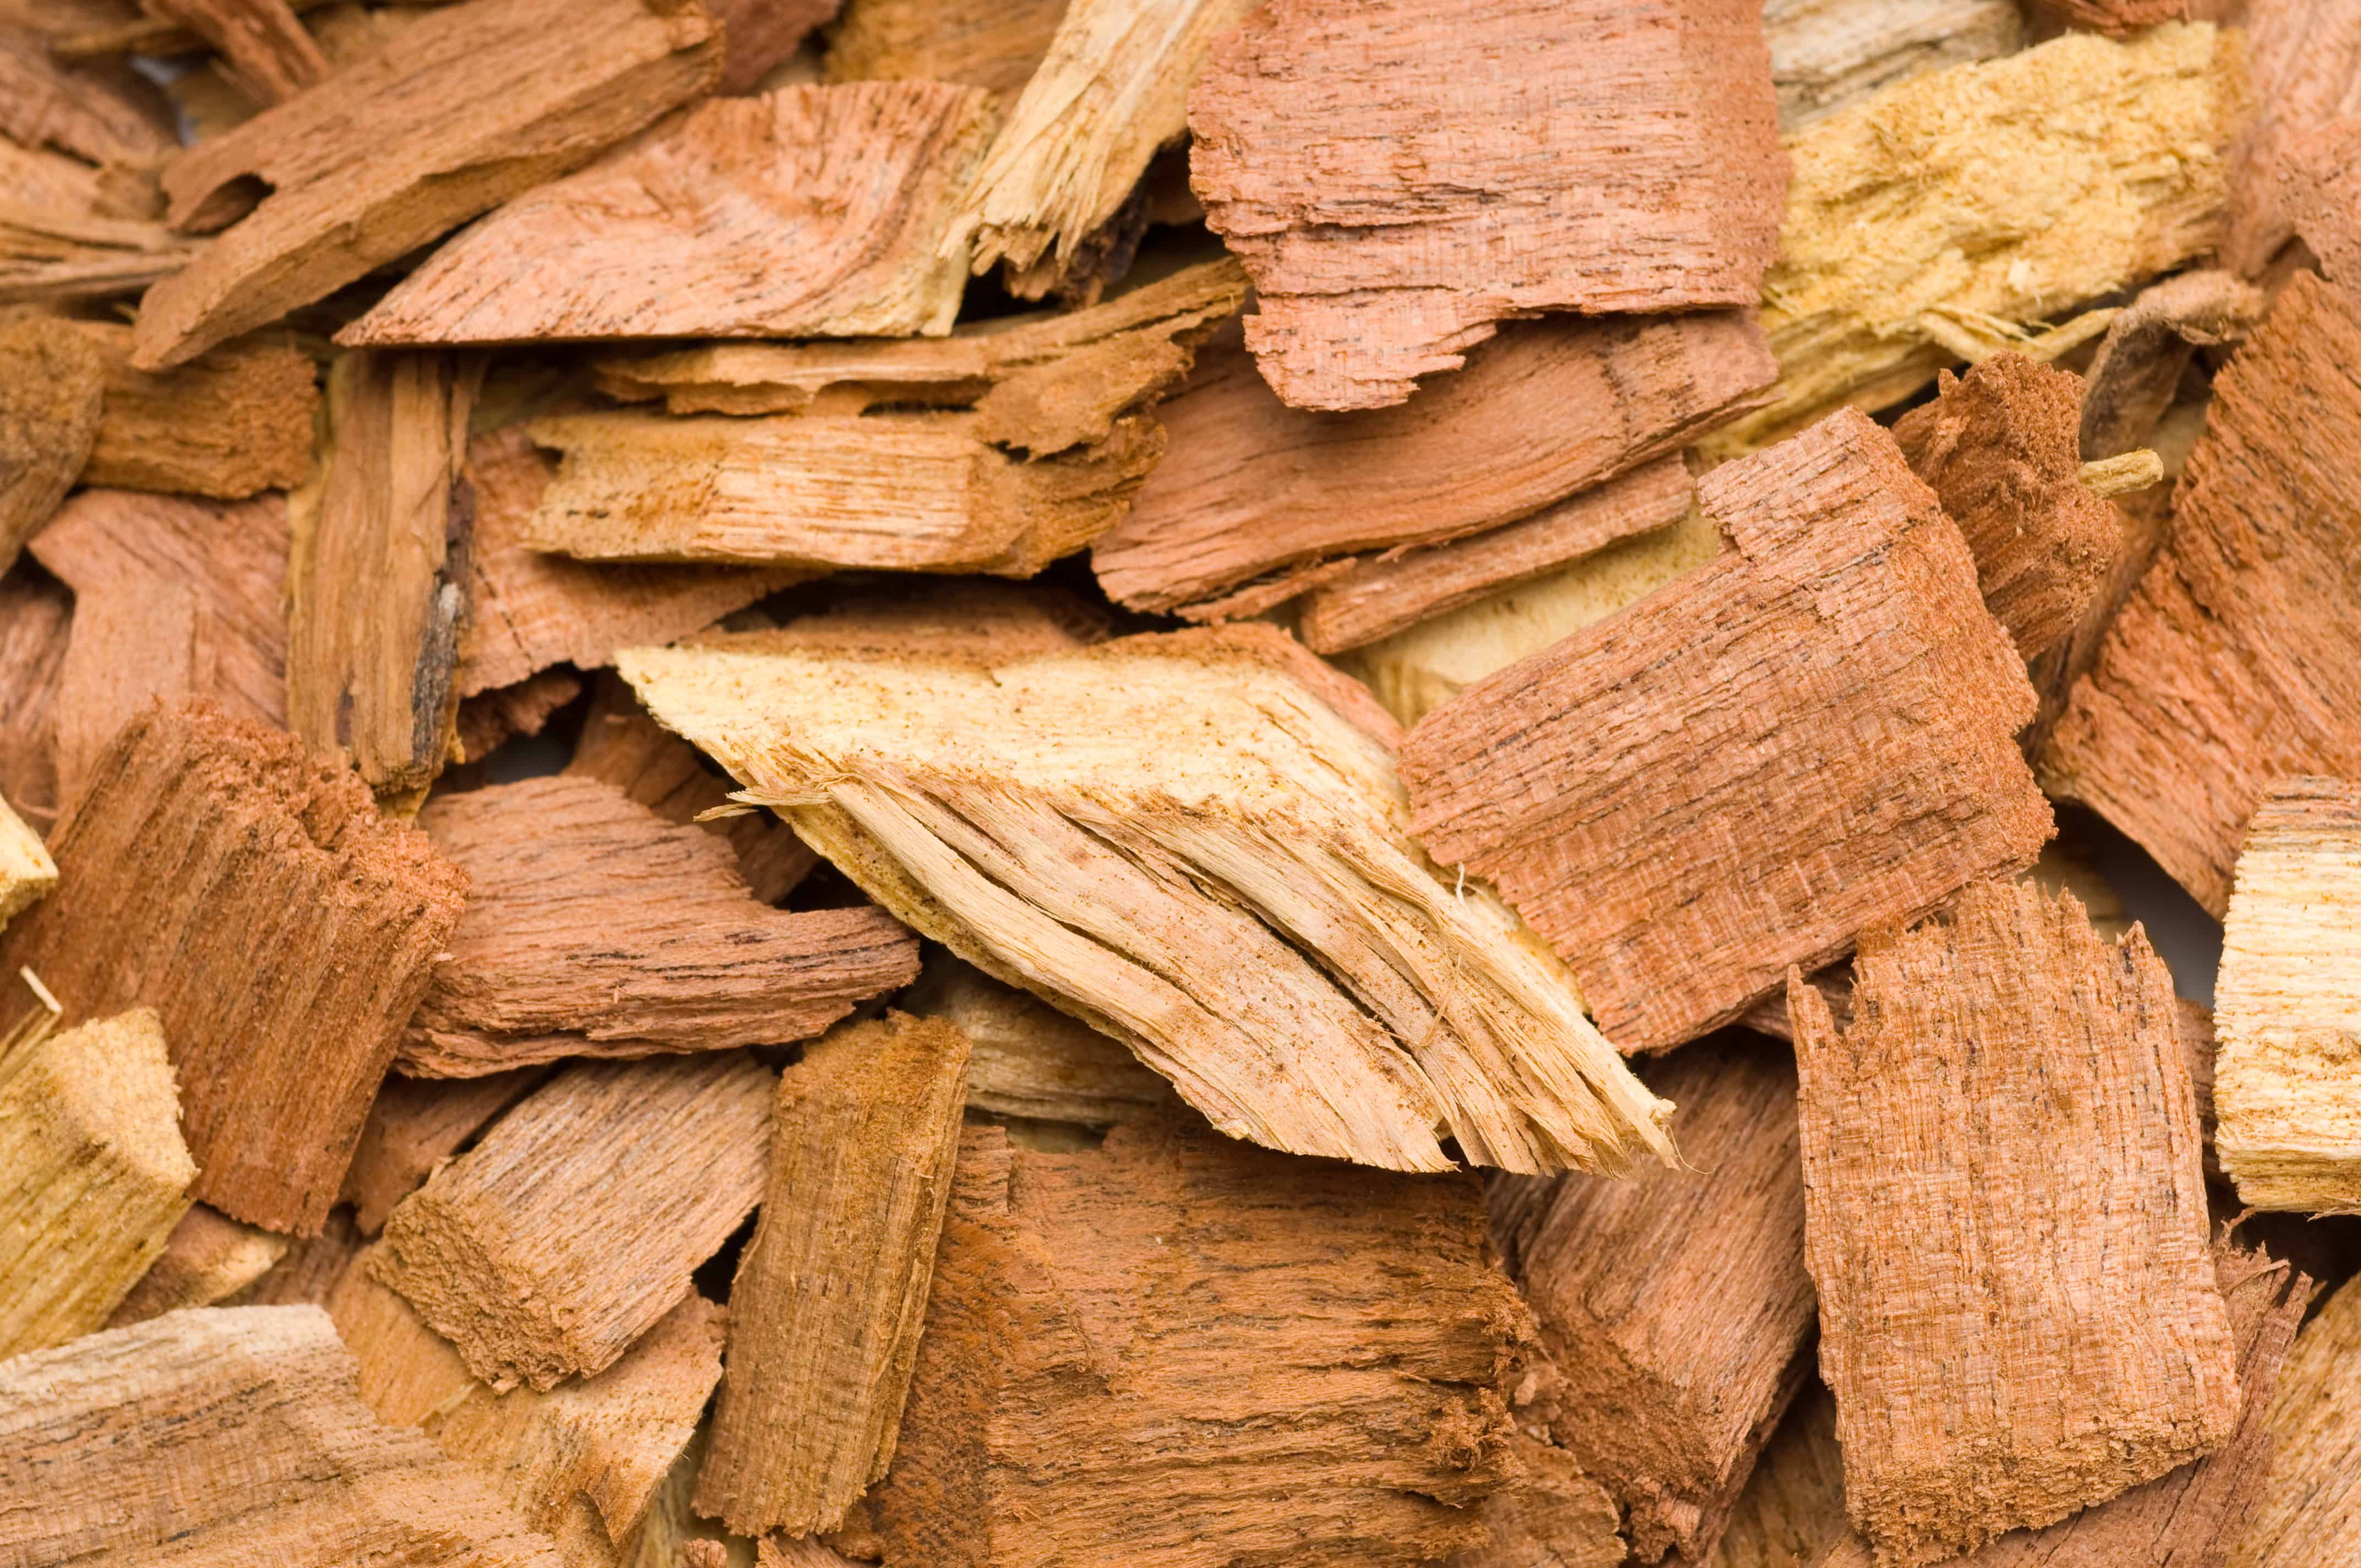 Is Mesquite Wood Good For Smoking Foods?